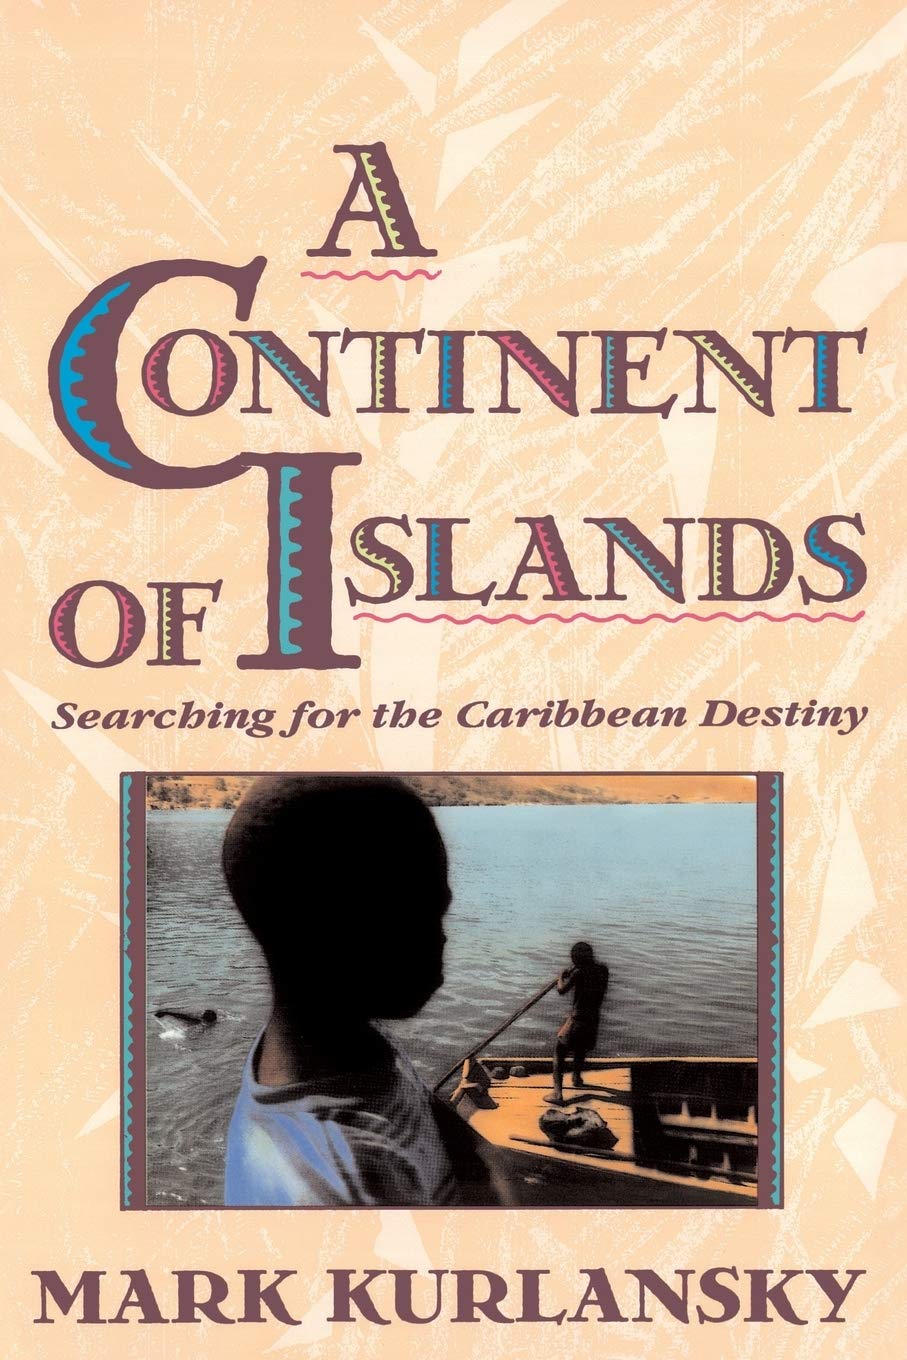 A Continent of Islands:  Searching for the Caribbean Destiny.